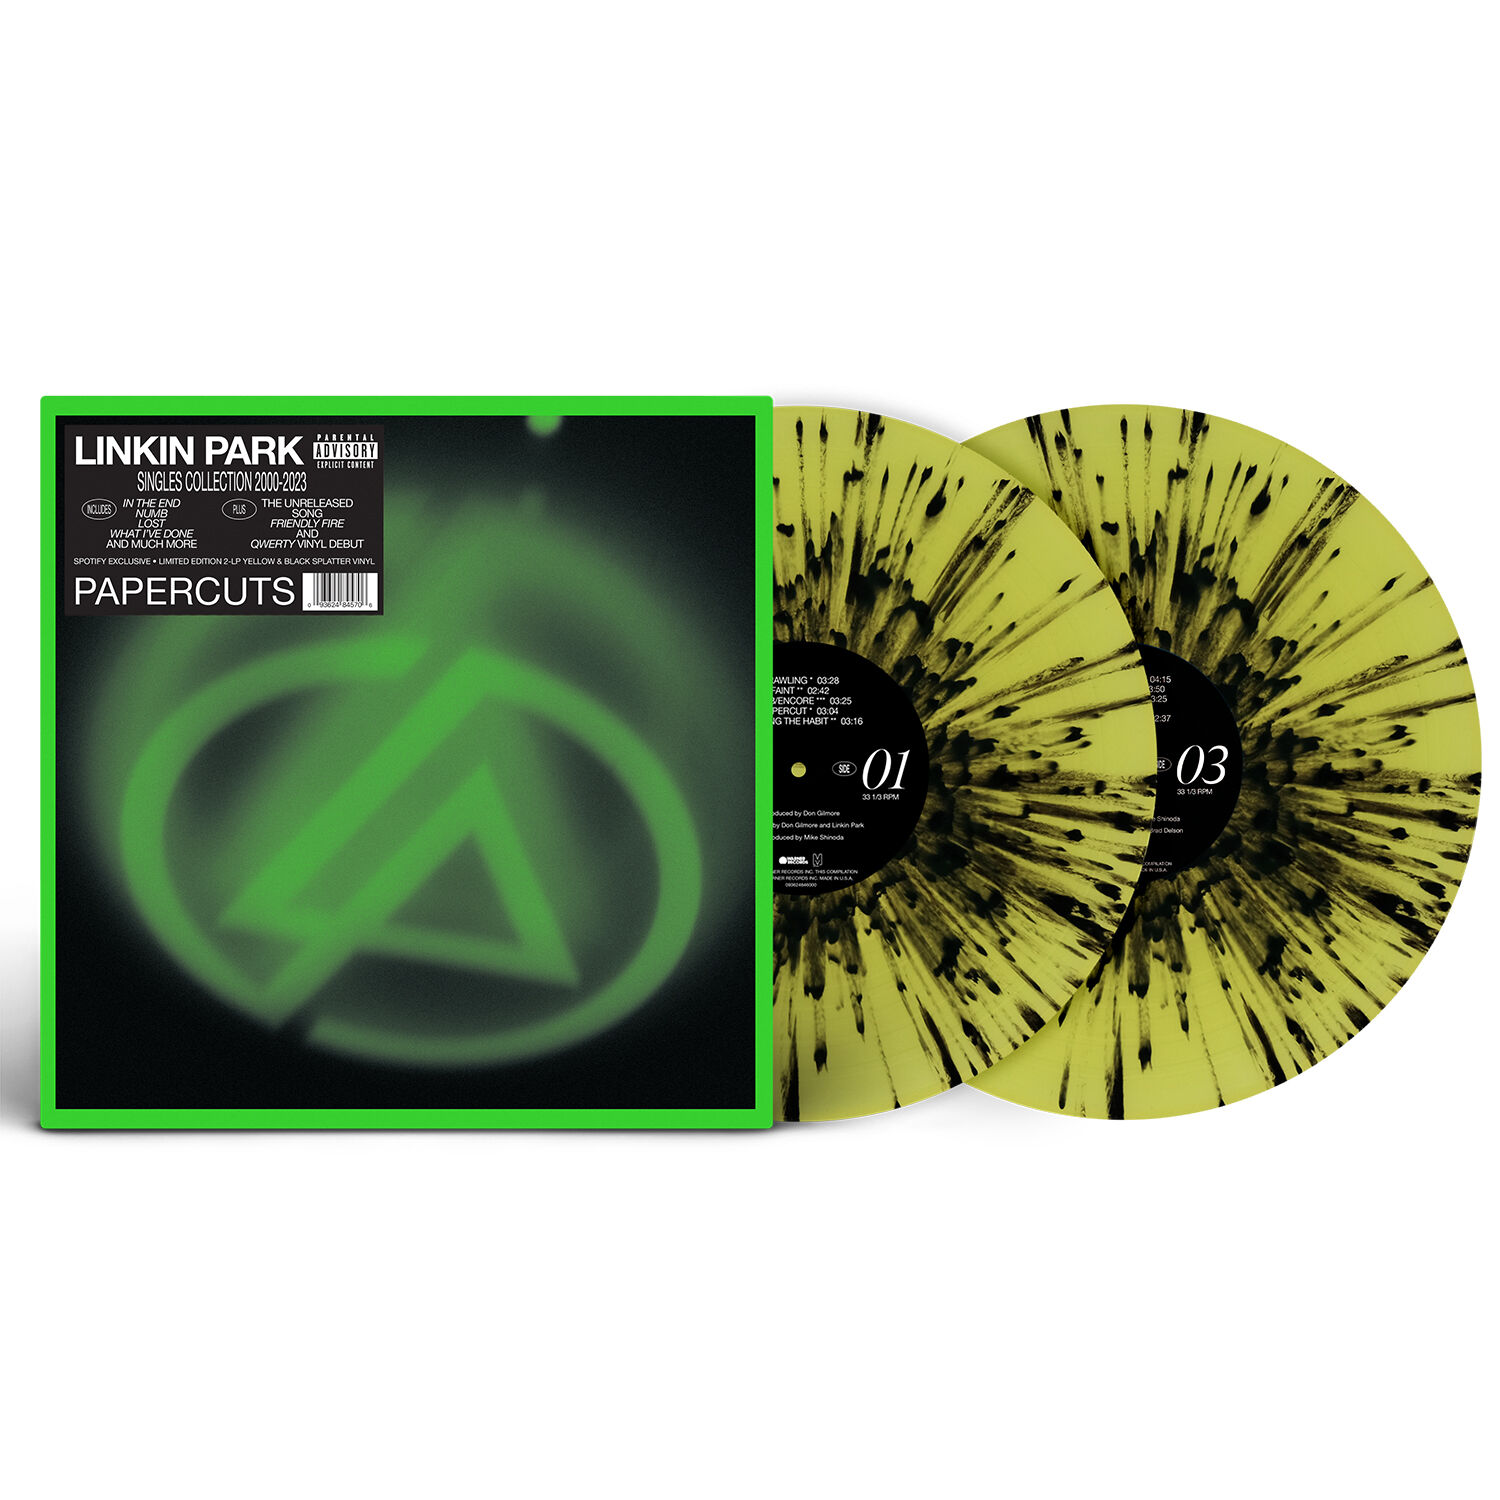 PAPERCUTS LIMITED EDITION SPOTIFY EXCLUSIVE YELLOW & BLACK 